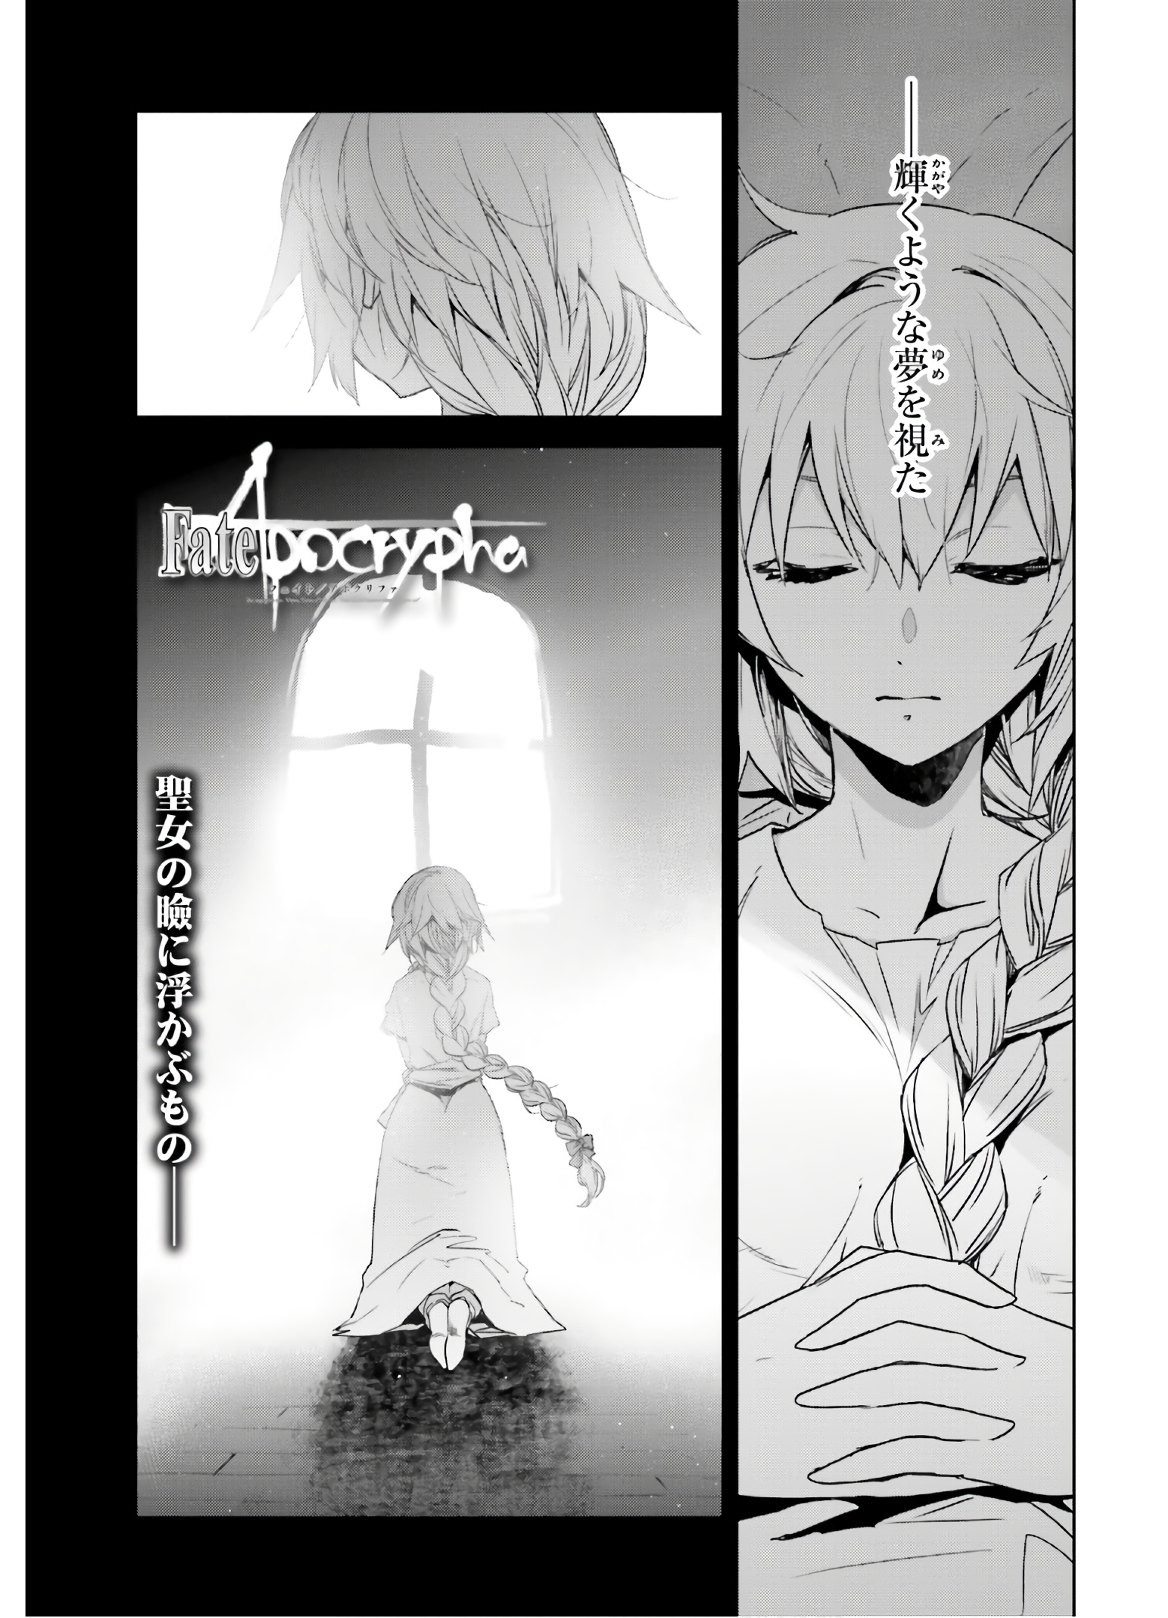 Fate-Apocrypha - Chapter 41 - Page 1